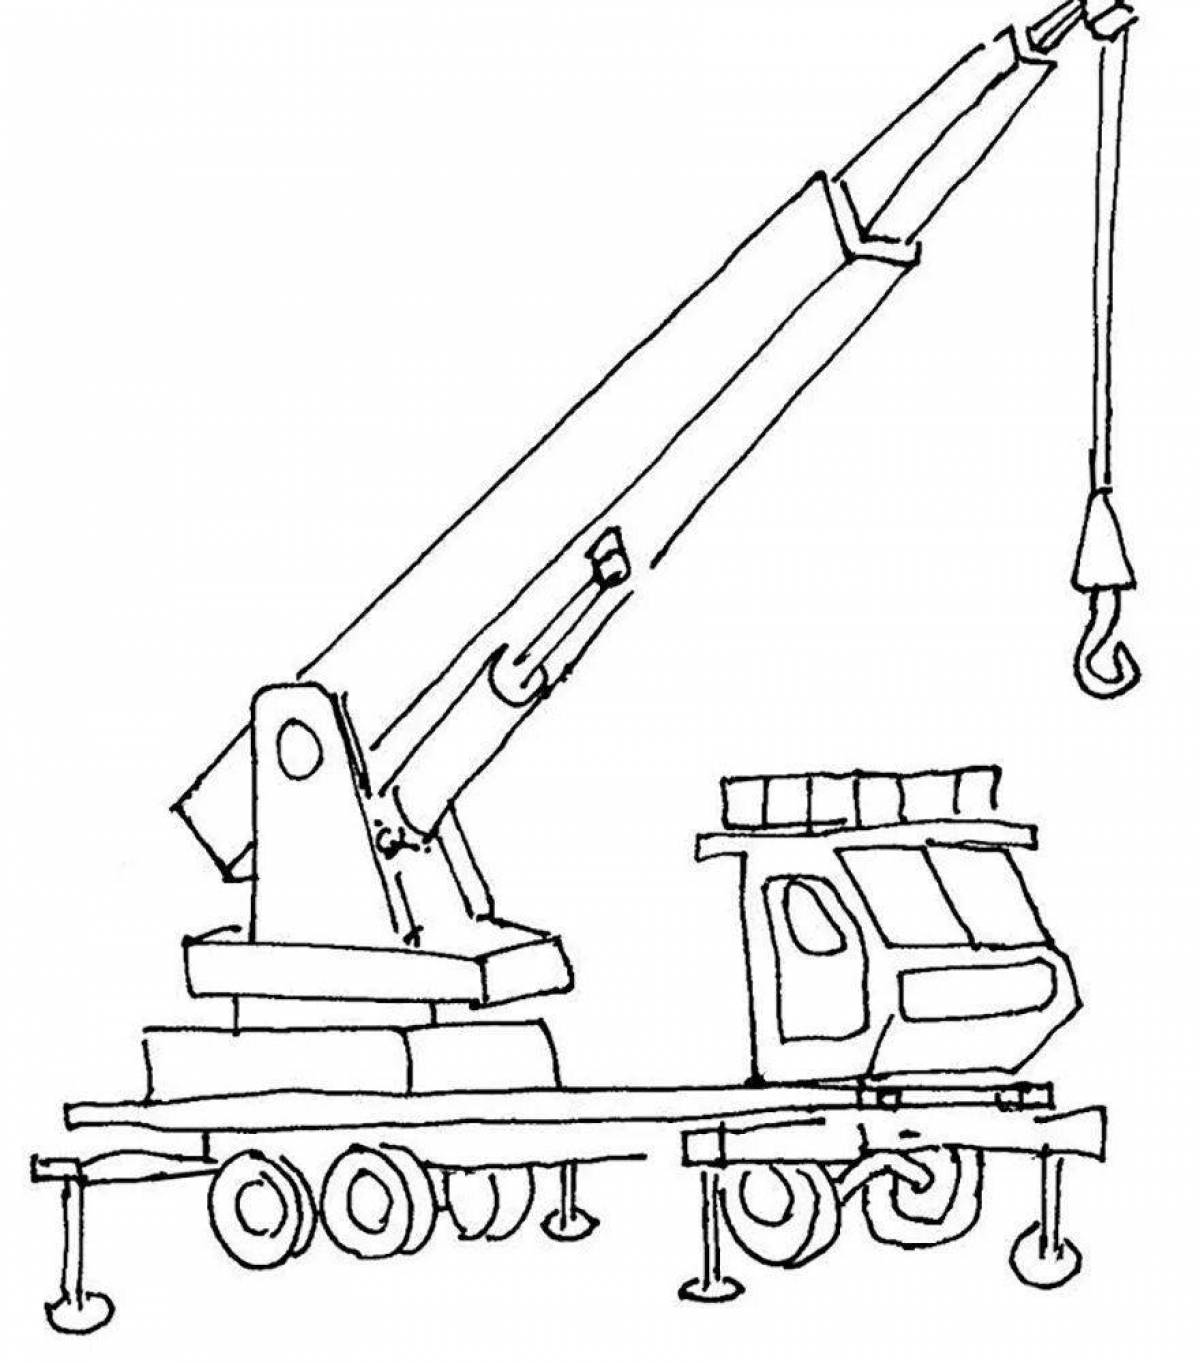 Colorful crane coloring page